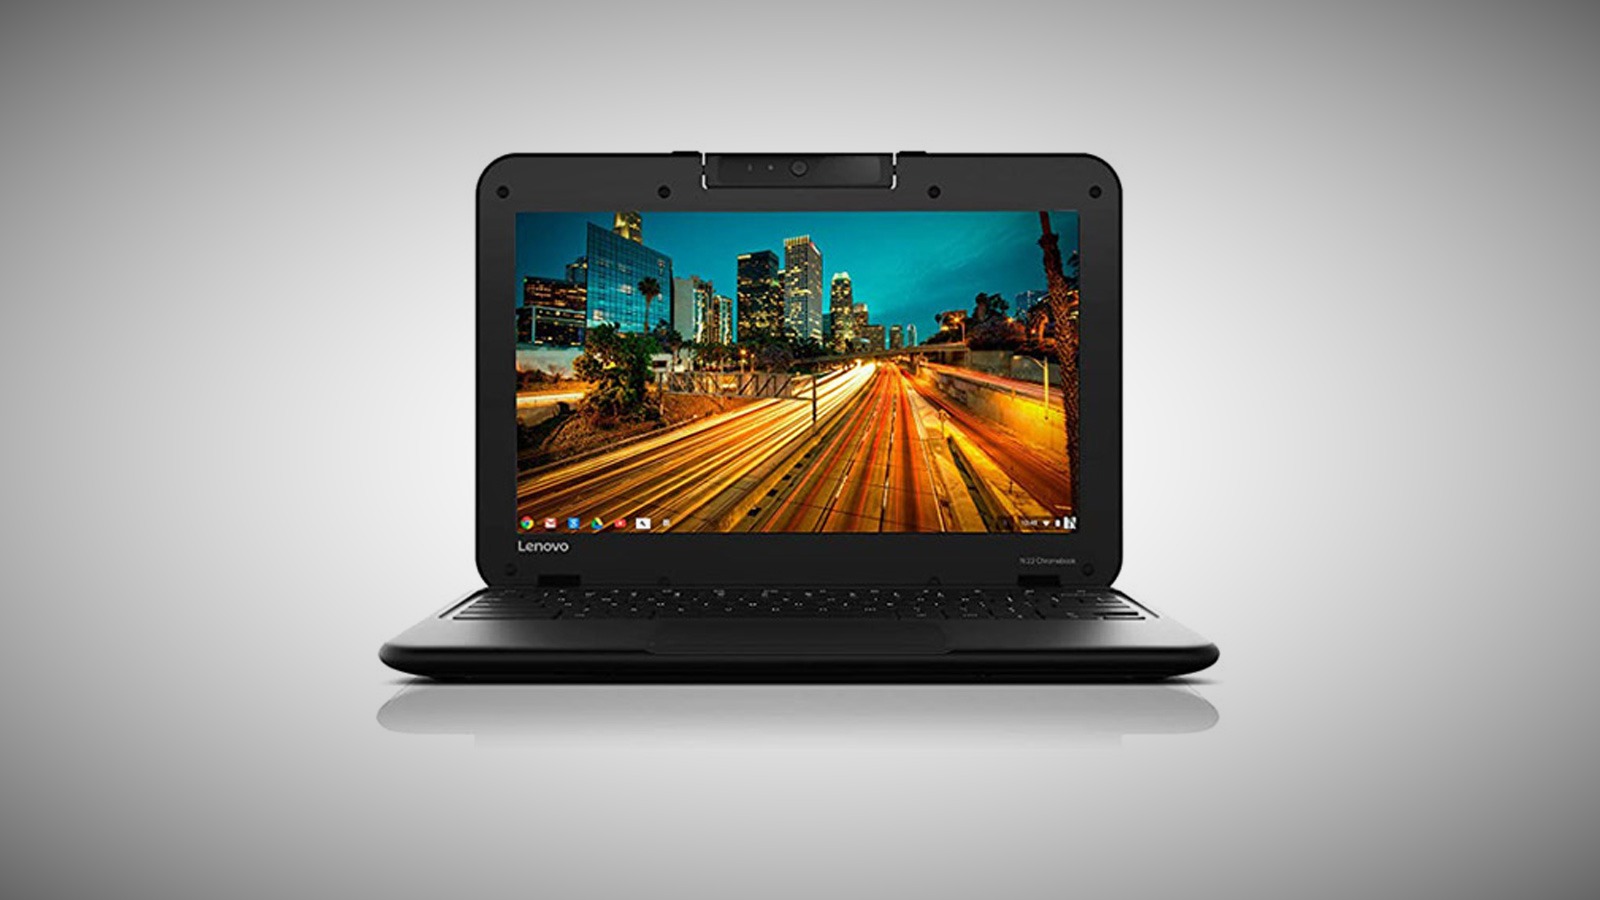 Deal alert: Lenovo's $300 Chromebook tablet is still discounted to $99